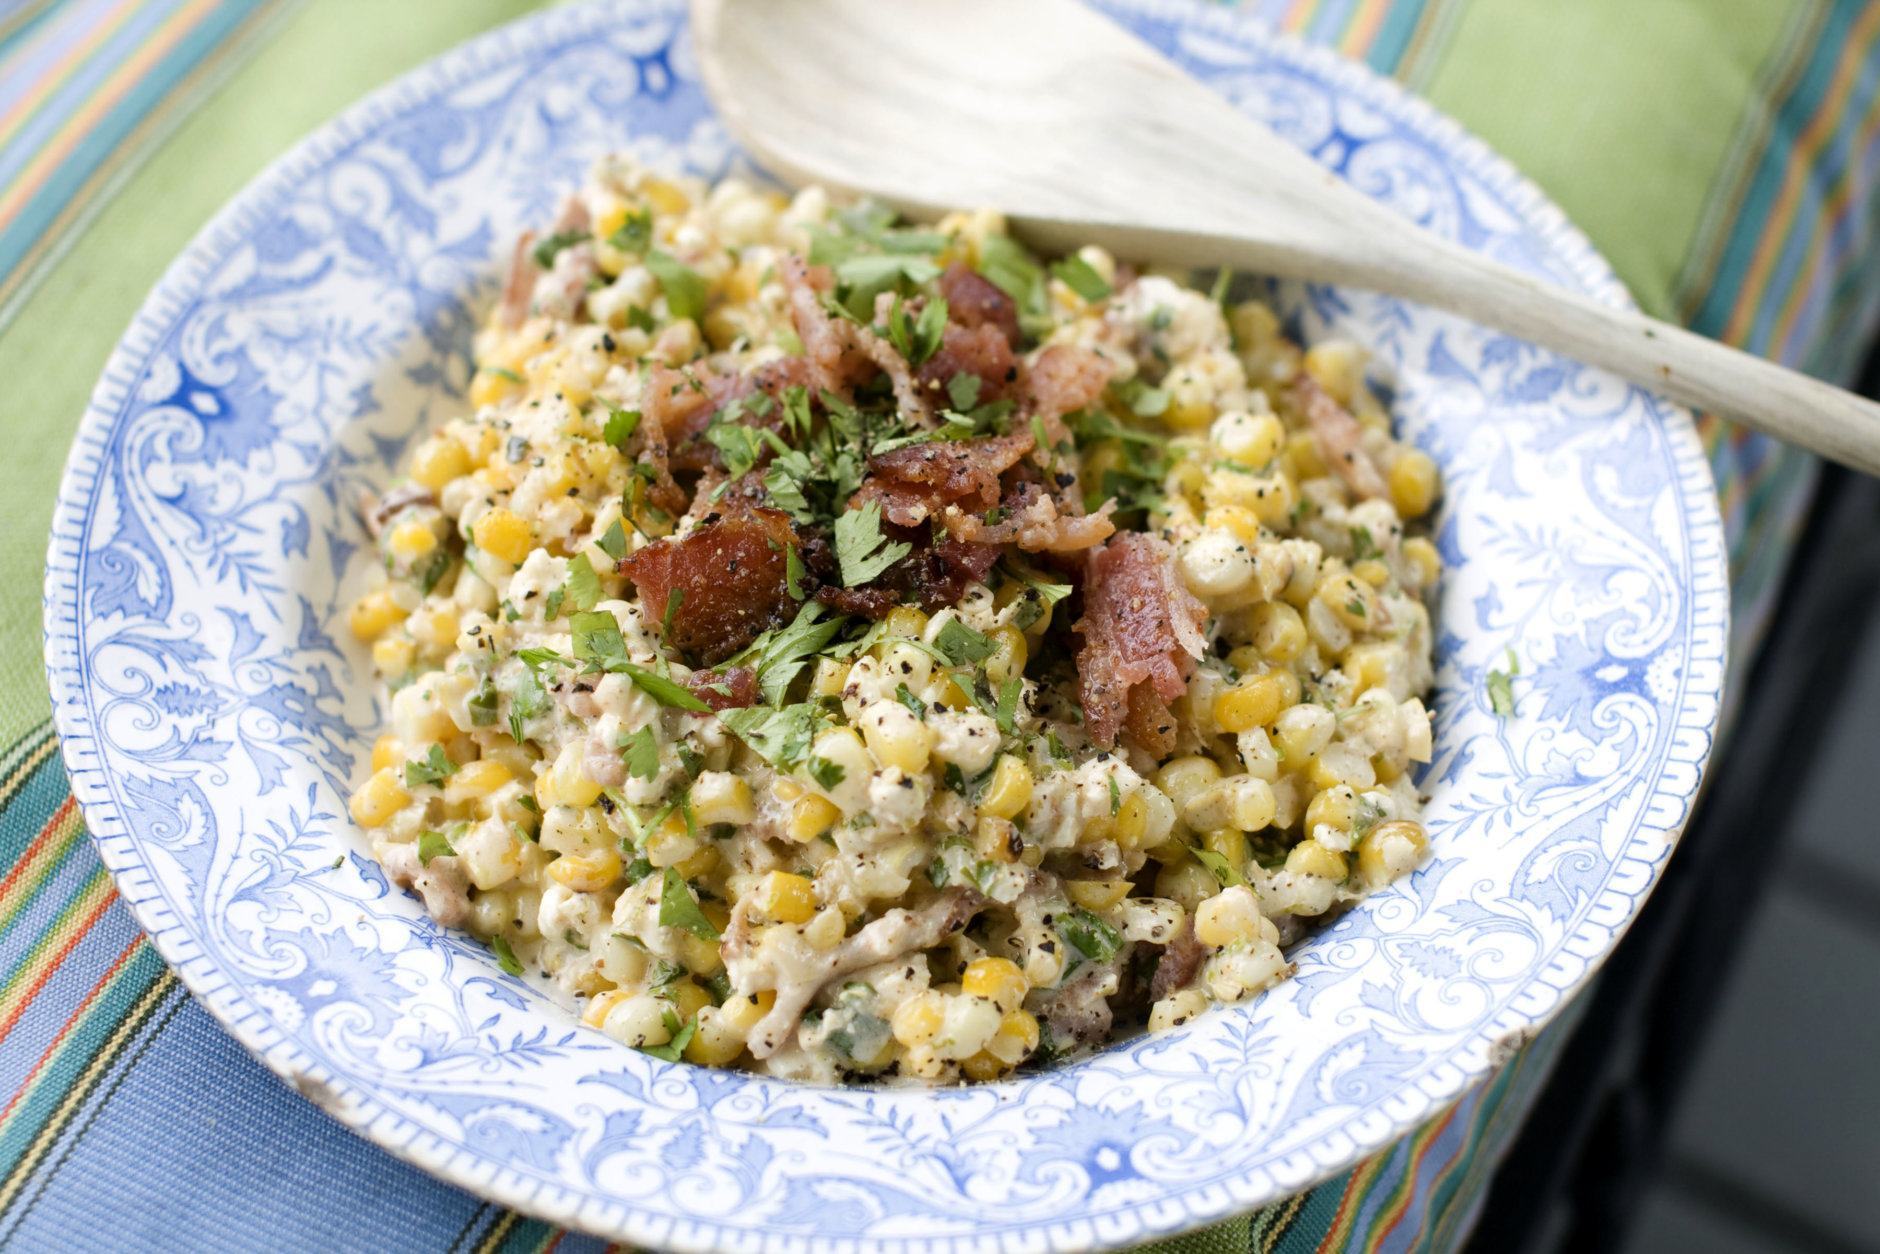 This July 29, 2013 photo shows grilled Mexican street corn salad in Concord, N.H. (AP Photo/Matthew Mead)